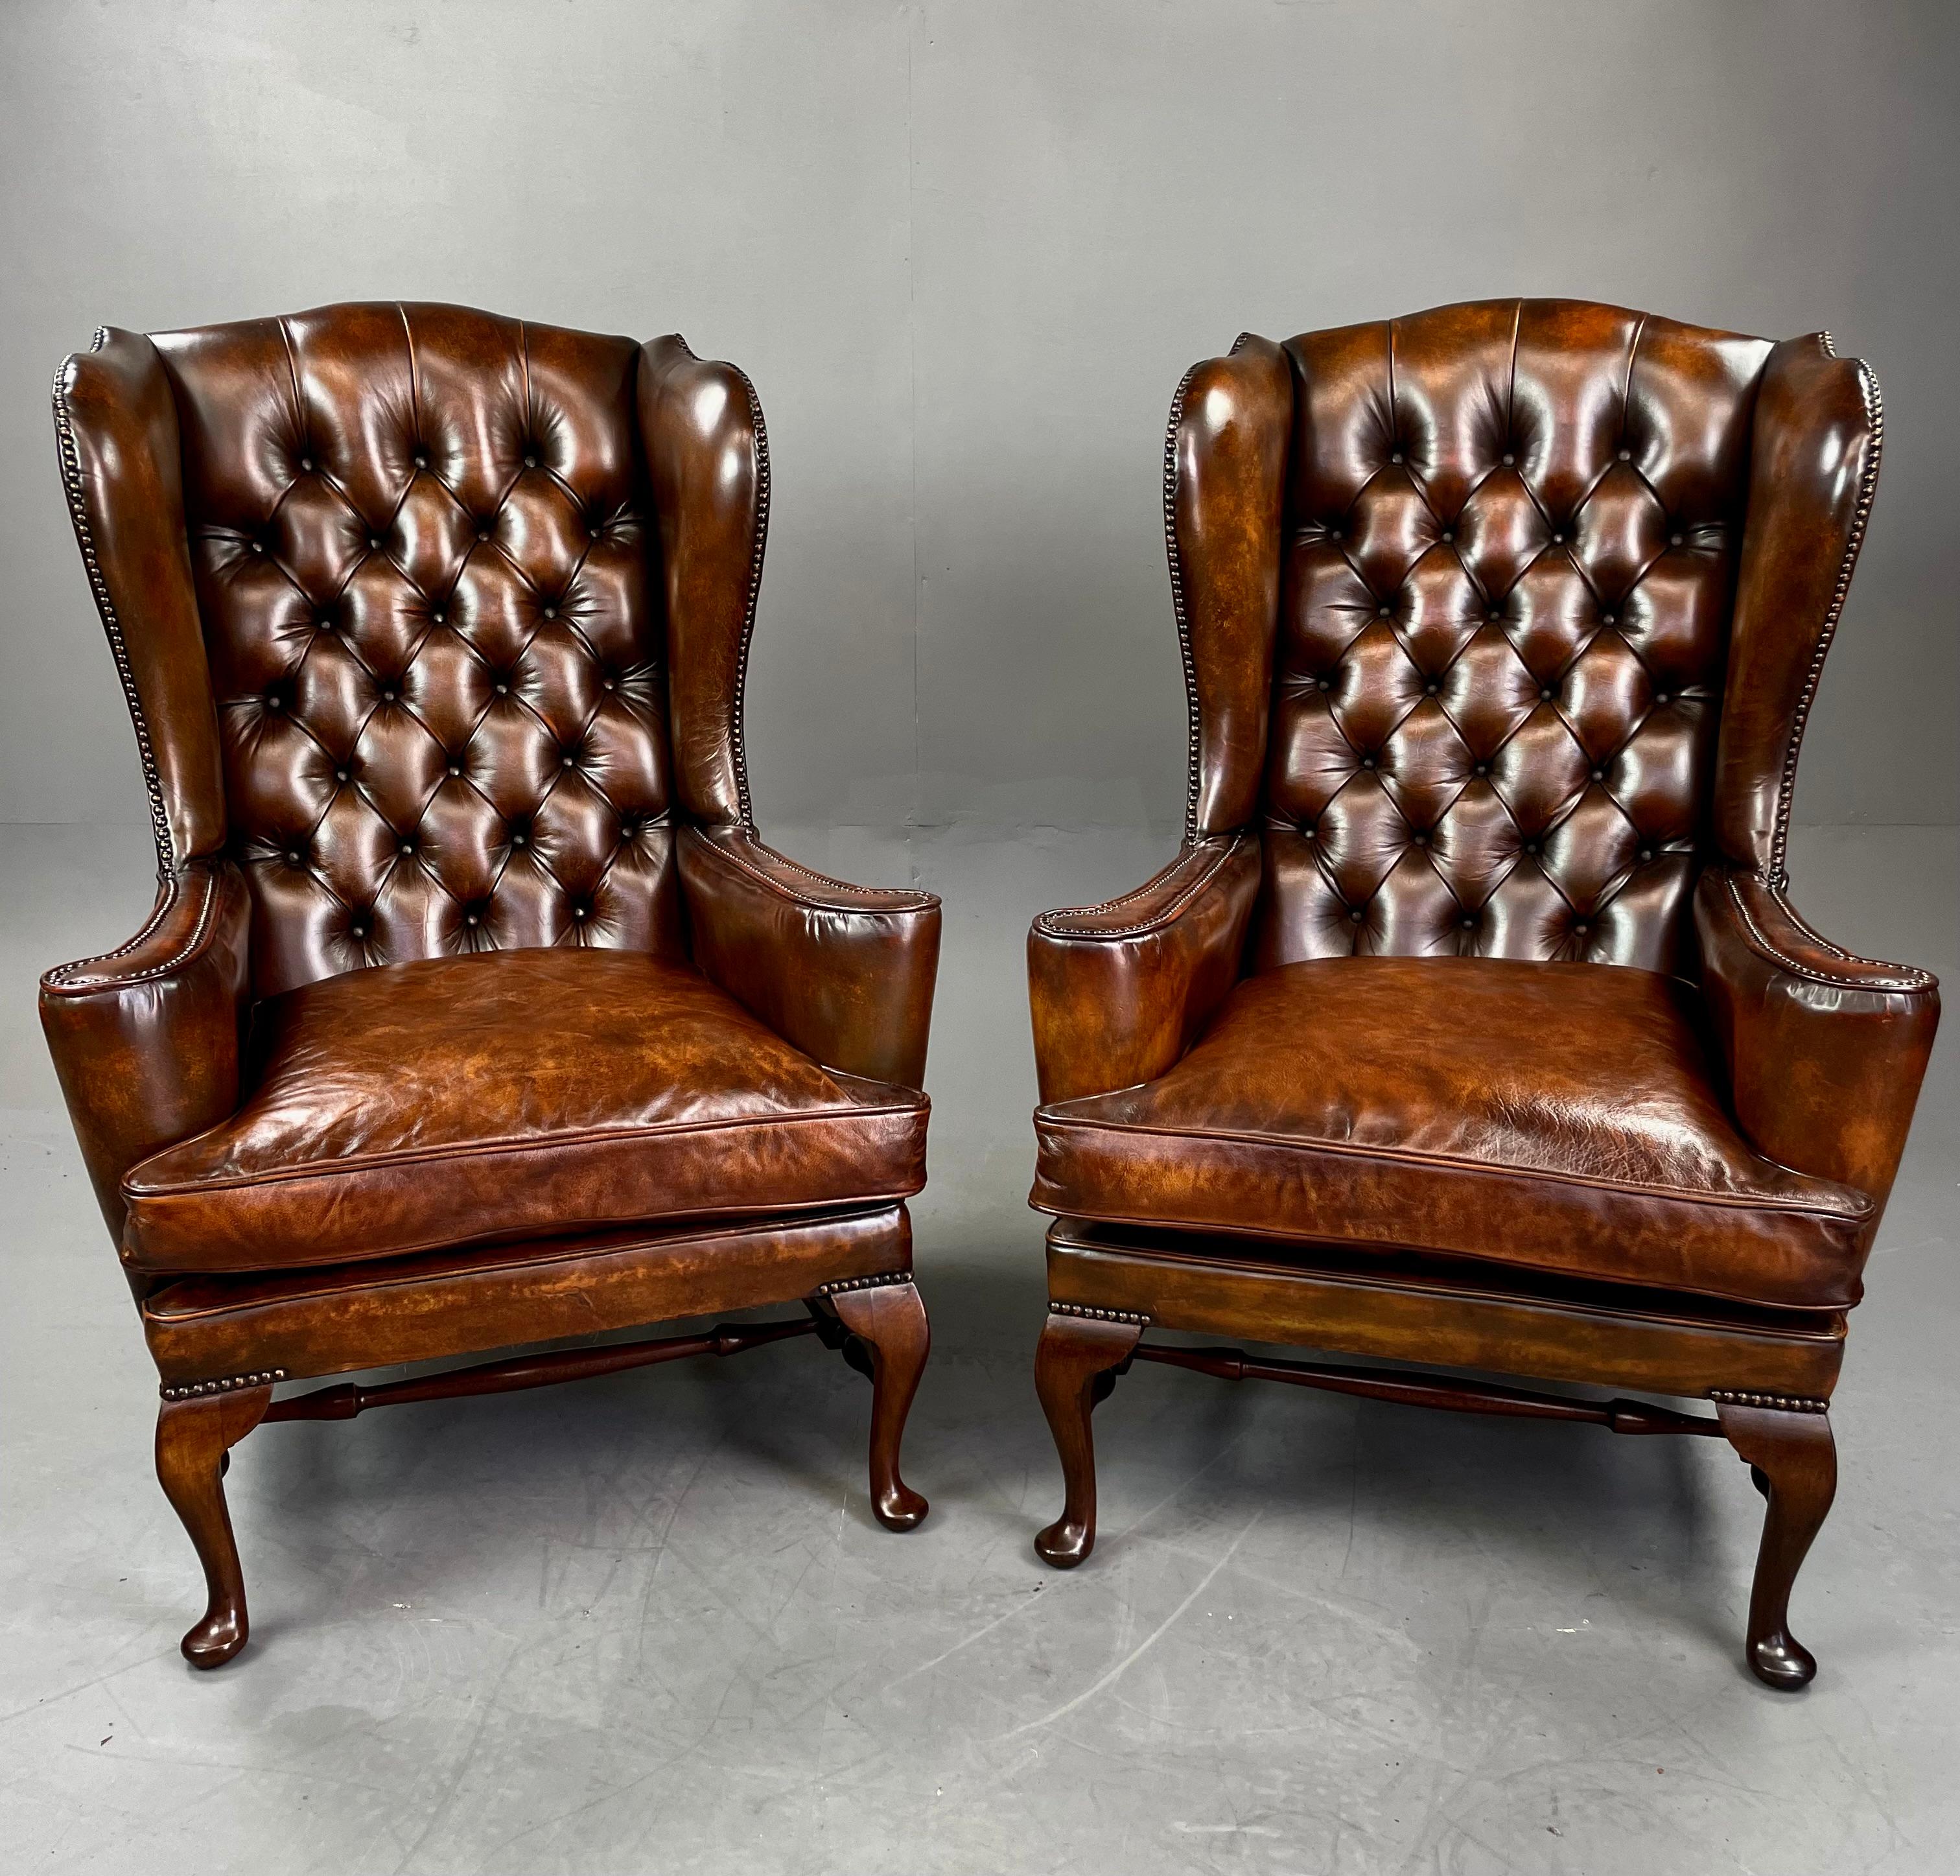 A fine pair of English Antique leather wing chairs hand dyed and finished to give a unique finish. The chairs are all original leather with deep buttoned backs and antique brass stud work accept replacement cushions which have been deep stuffed for